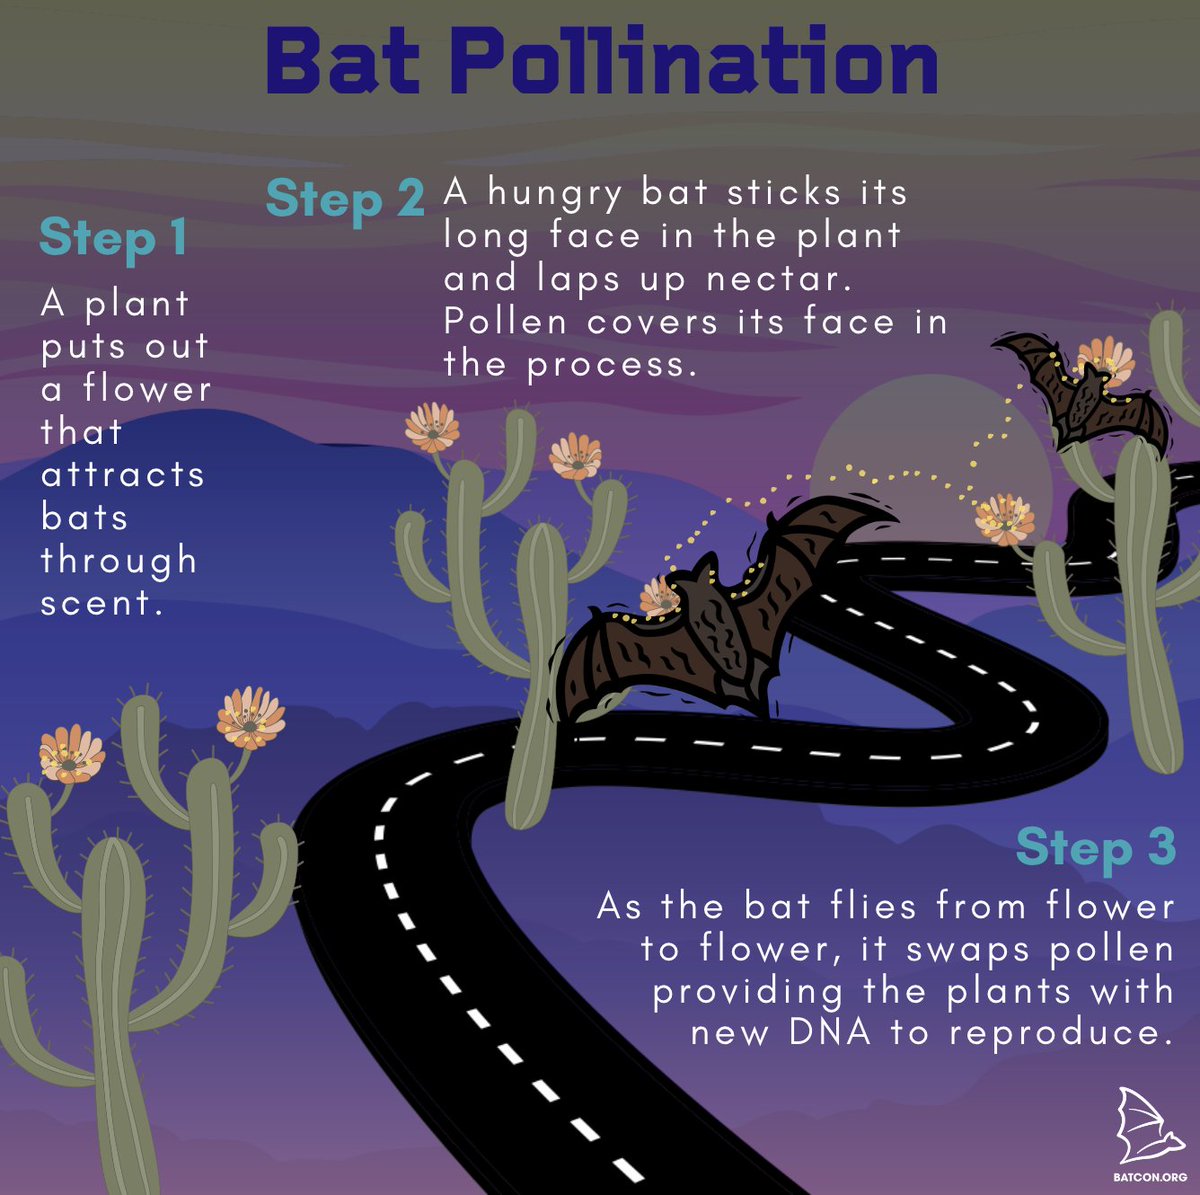 Don't forget about the night shift! Bats are hard at work pollinating plants after dark. In fact, some plants have even evolved special flower shapes that reflect the bats' echolocation better, enabling the bat to find the flower easier. 🌸 #PollinatorWeek